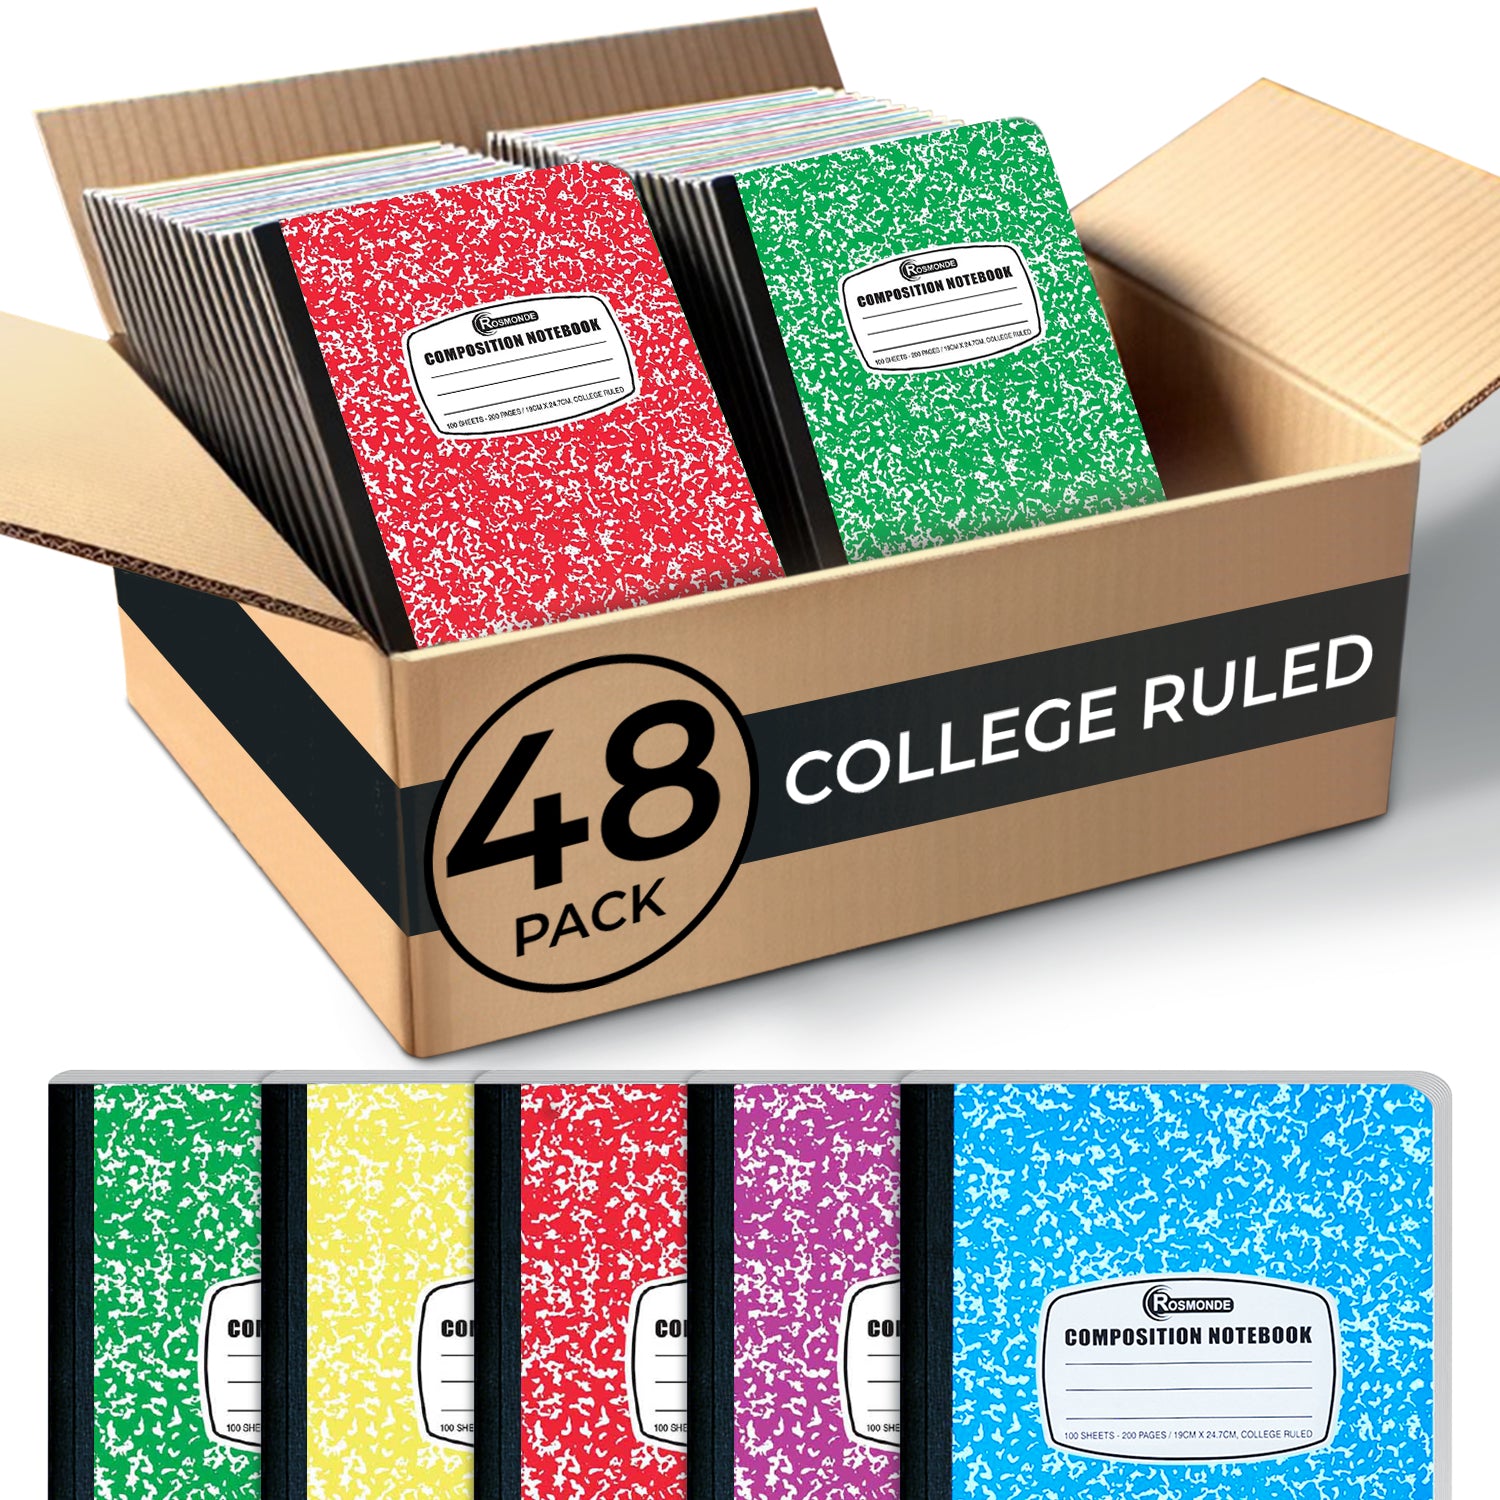 wholesale+assorted+color+marble+bulk+48+pack+composition+notebooks+supplier+united+states+R_cn2_college_ruled_asrt_12Pack_48+cn2_college_ruled_asrt_12Pack_48